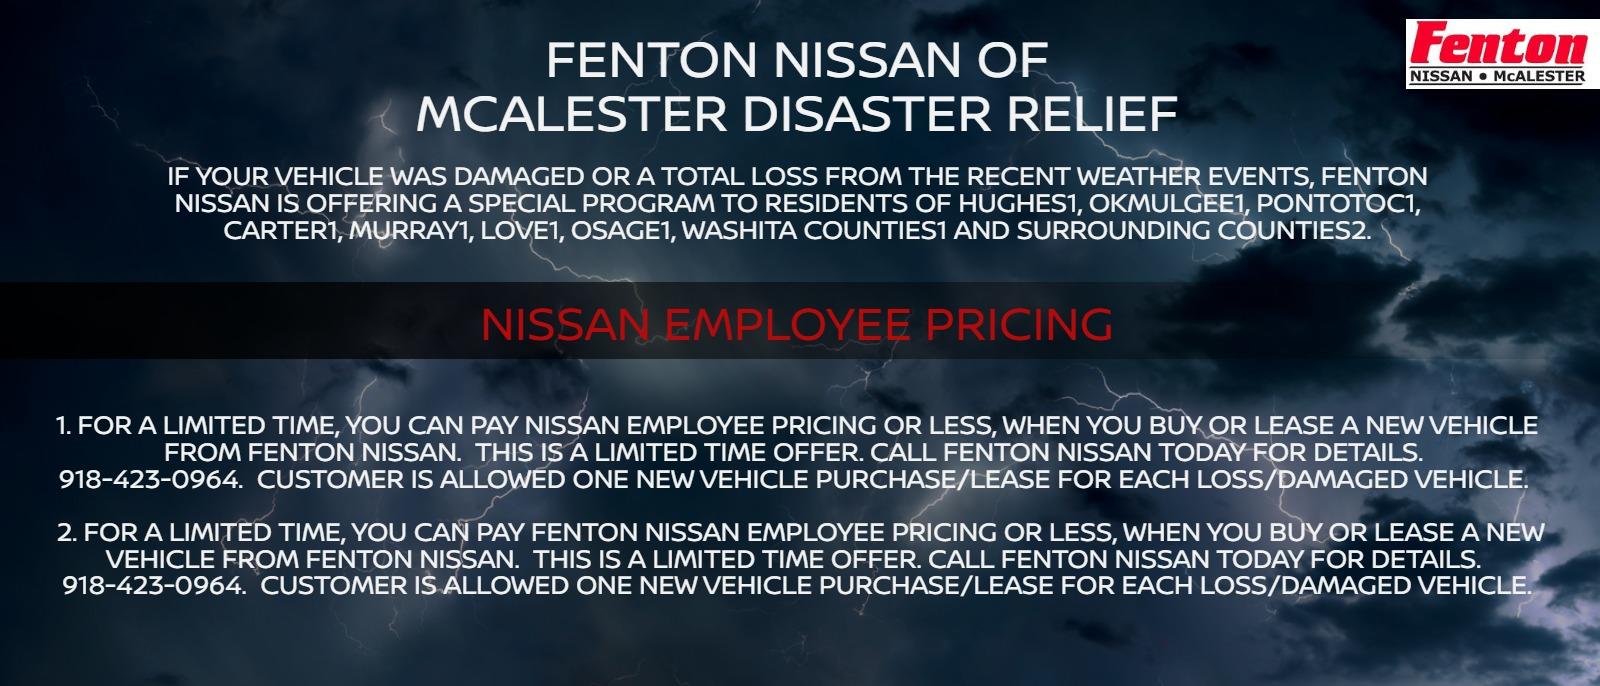 FENTON NISSAN OF MCALESTER DISASTER RELIEF

IF YOUR VEHICLE WAS DAMAGED OR A TOTAL LOSS FROM THE RECENT WEATHER EVENTS, FENTON NISSAN IS OFFERING A SPECIAL PROGRAM TO RESIDENTS OF HUGHES, OKMULGEE, PONTOTOC, CARTER, MURRAY, LOVE, OSAGE OR WASHITA COUNTIES *

NISSAN EMPLOYEE PRICING

FOR A LIMITED TIME, YOU CAN PAY NISSAN EMPLOYEE PRICING OR LESS, WHEN YOU BUY OR LEASE A NEW VEHICLE FROM FENTON NISSAN. THIS IS A LIMITED TIME OFFER. CALL FENTON NISSAN TODAY FOR DETAILS. 918-423-0964